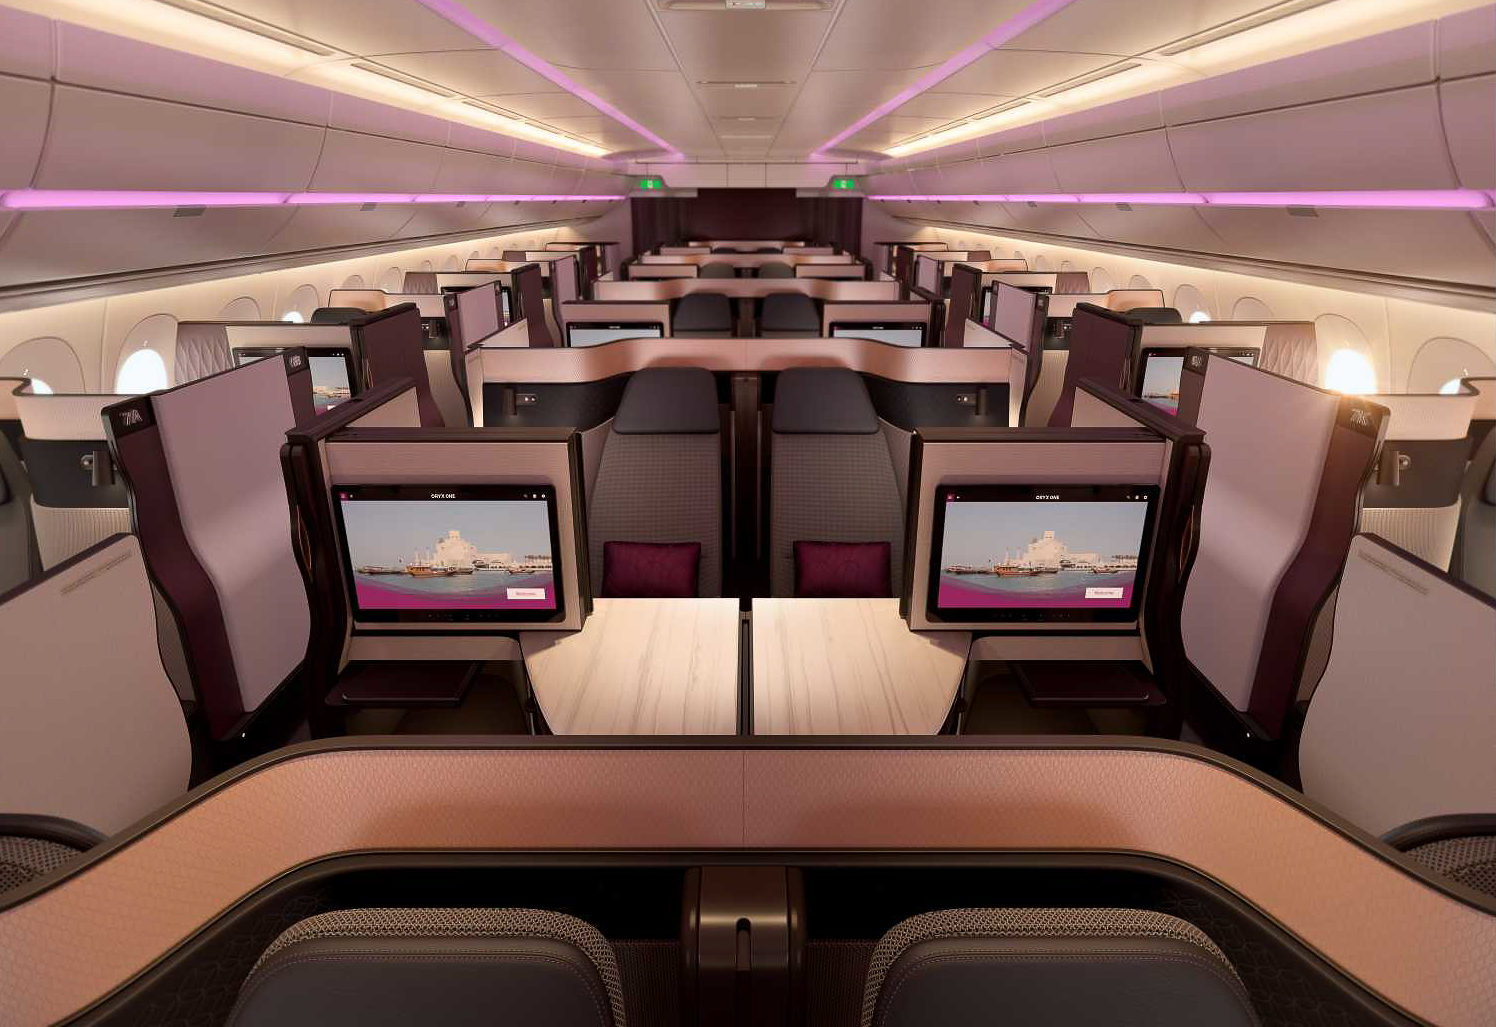 Latest Flight Deals: Qatar Airways And Air France Savings Through Amex, Discounts With Trip.com and Ethiopian New Route Discount